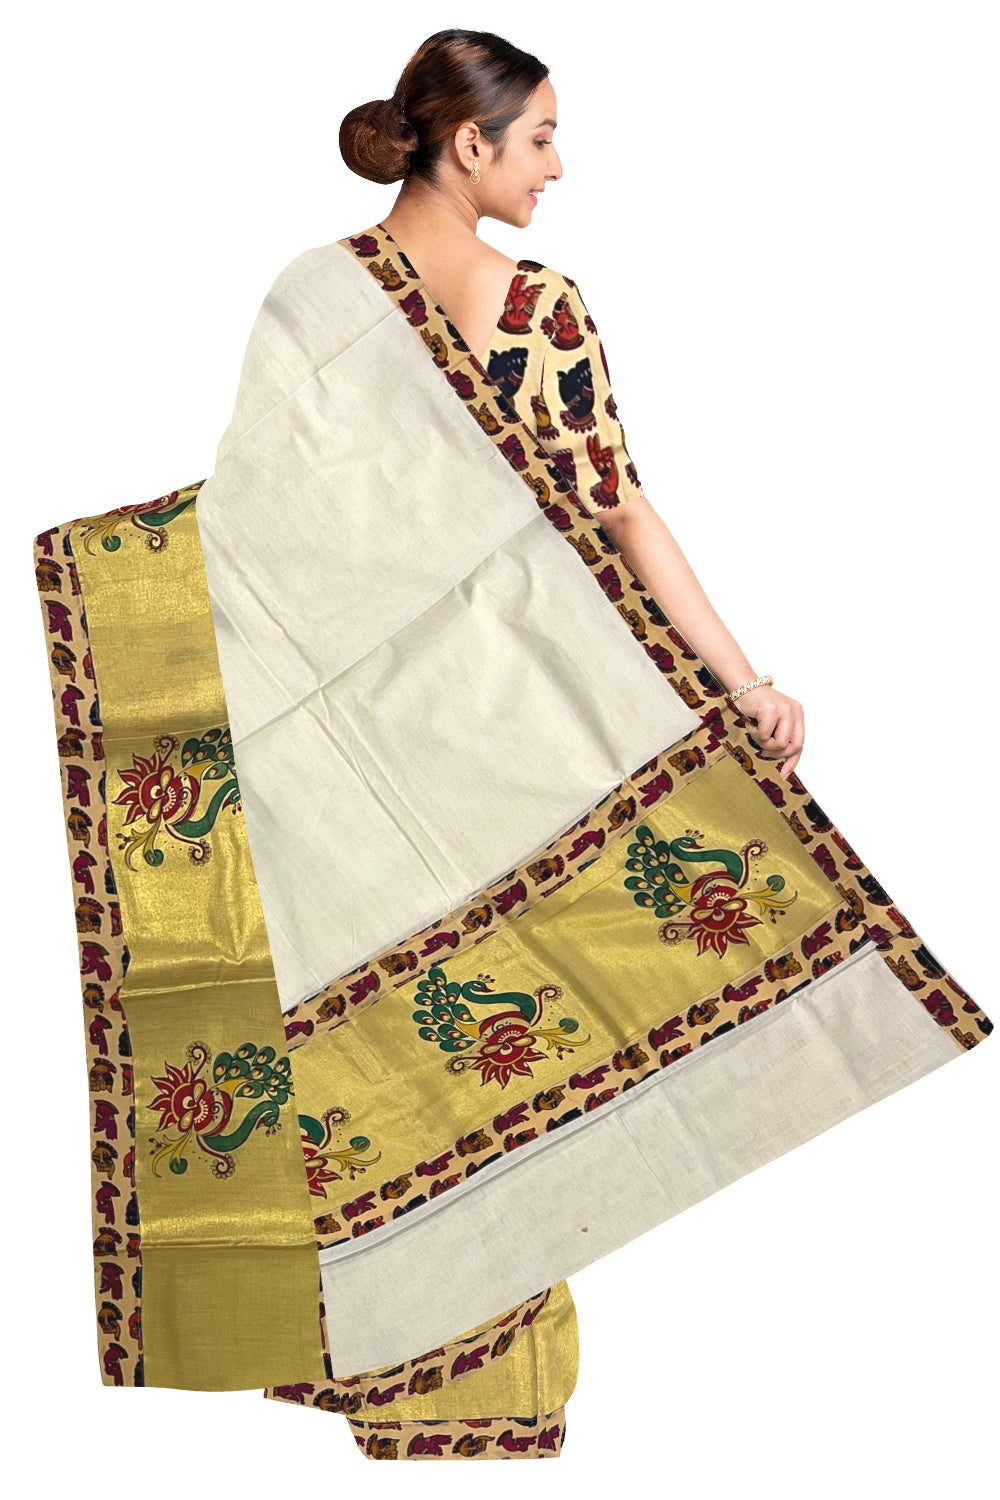 Kerala Pure Cotton Fusion Art Beige Hand Figures and Peacock Printed Kasavu Saree with Printed Blouse Piece